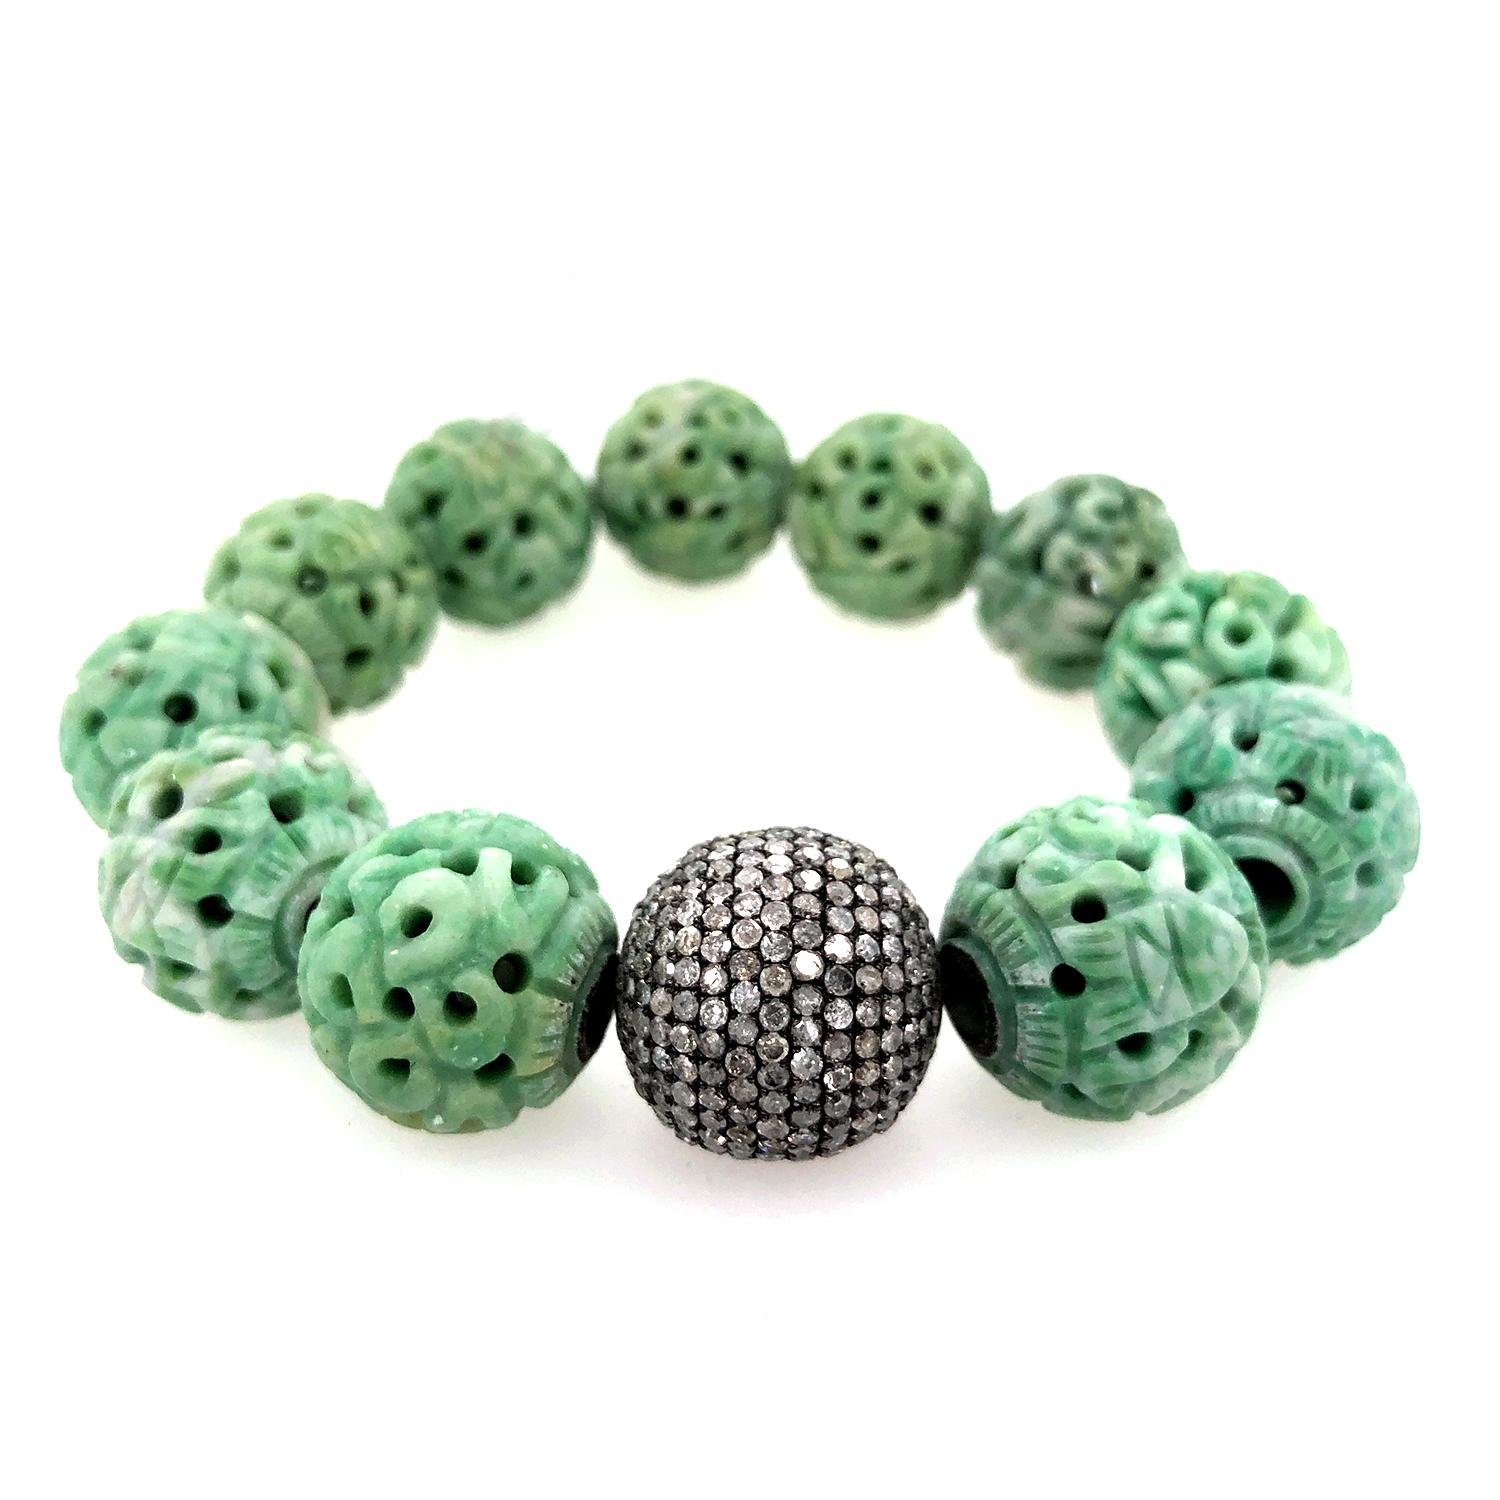 Great to stack this Carved Jade and Pave Diamond Stretchable Bracelet in Silver is lovely and such a eye catching piece. Diamond Pave ball bead and Jade Beads are 16mm big


Silver:15.59gms
Diamond:8.67cts
Jade:224cts
